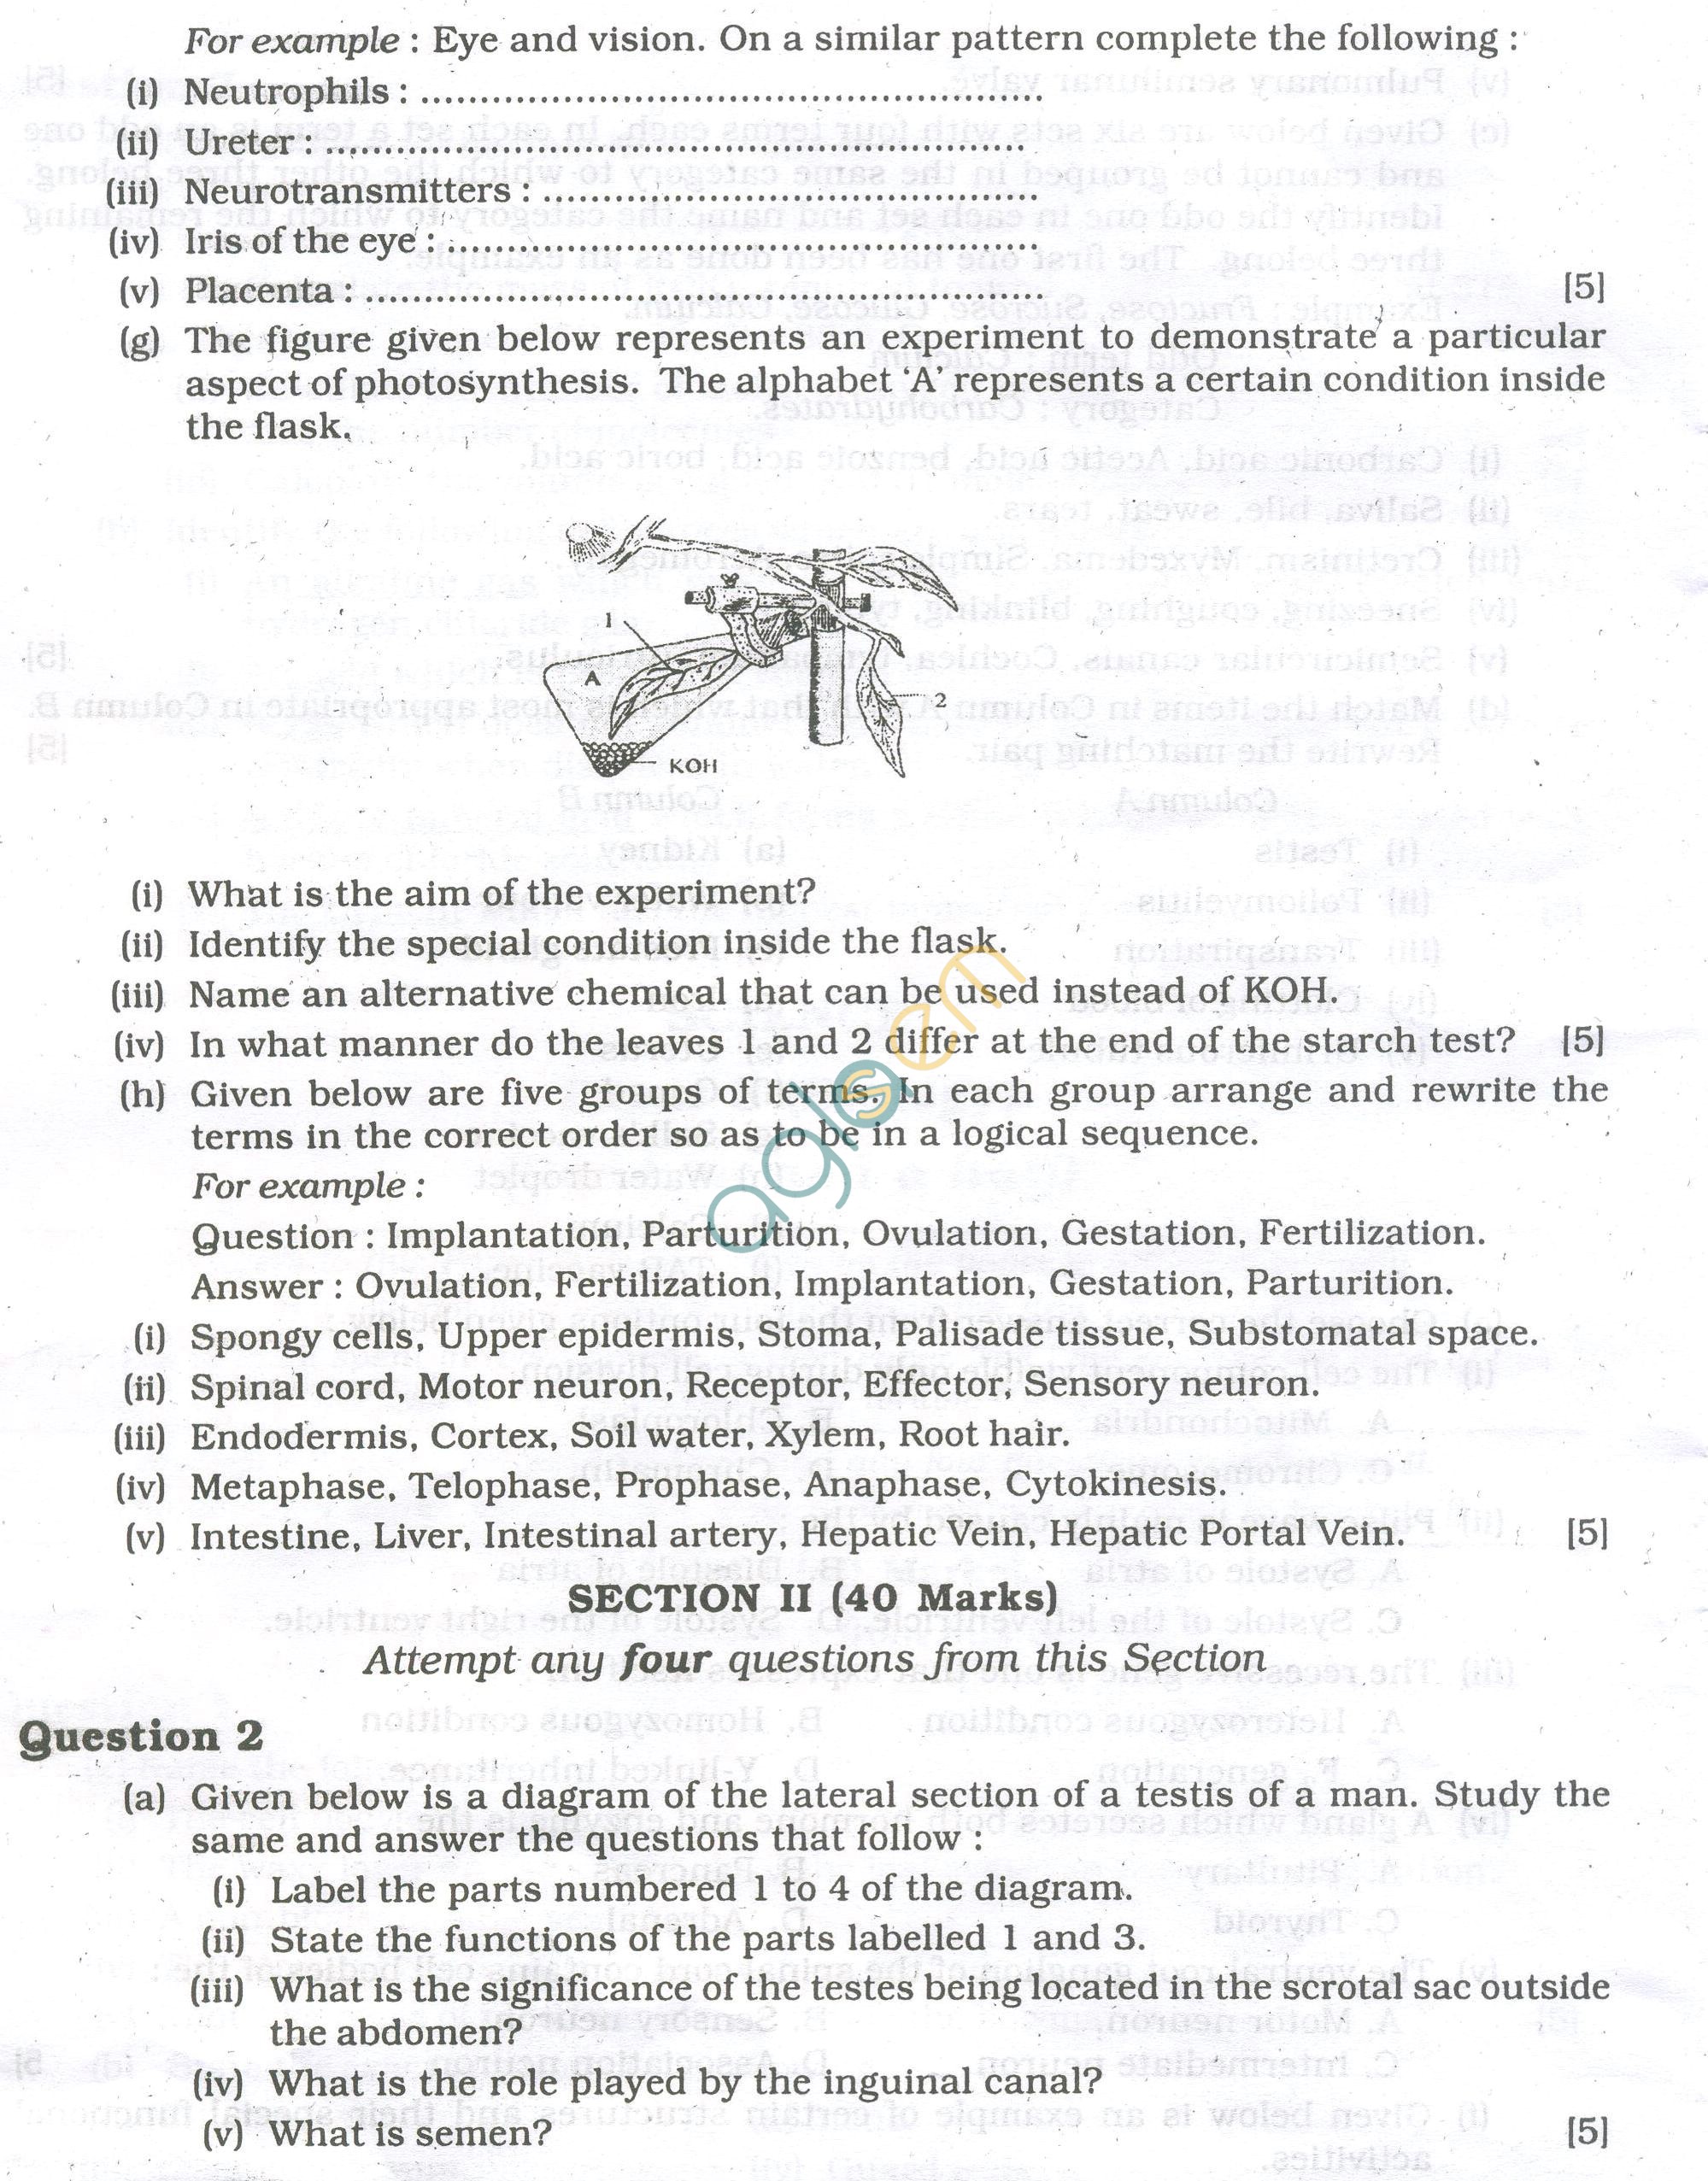 ICSE Question Papers 2013 for Class 10 - Biology/